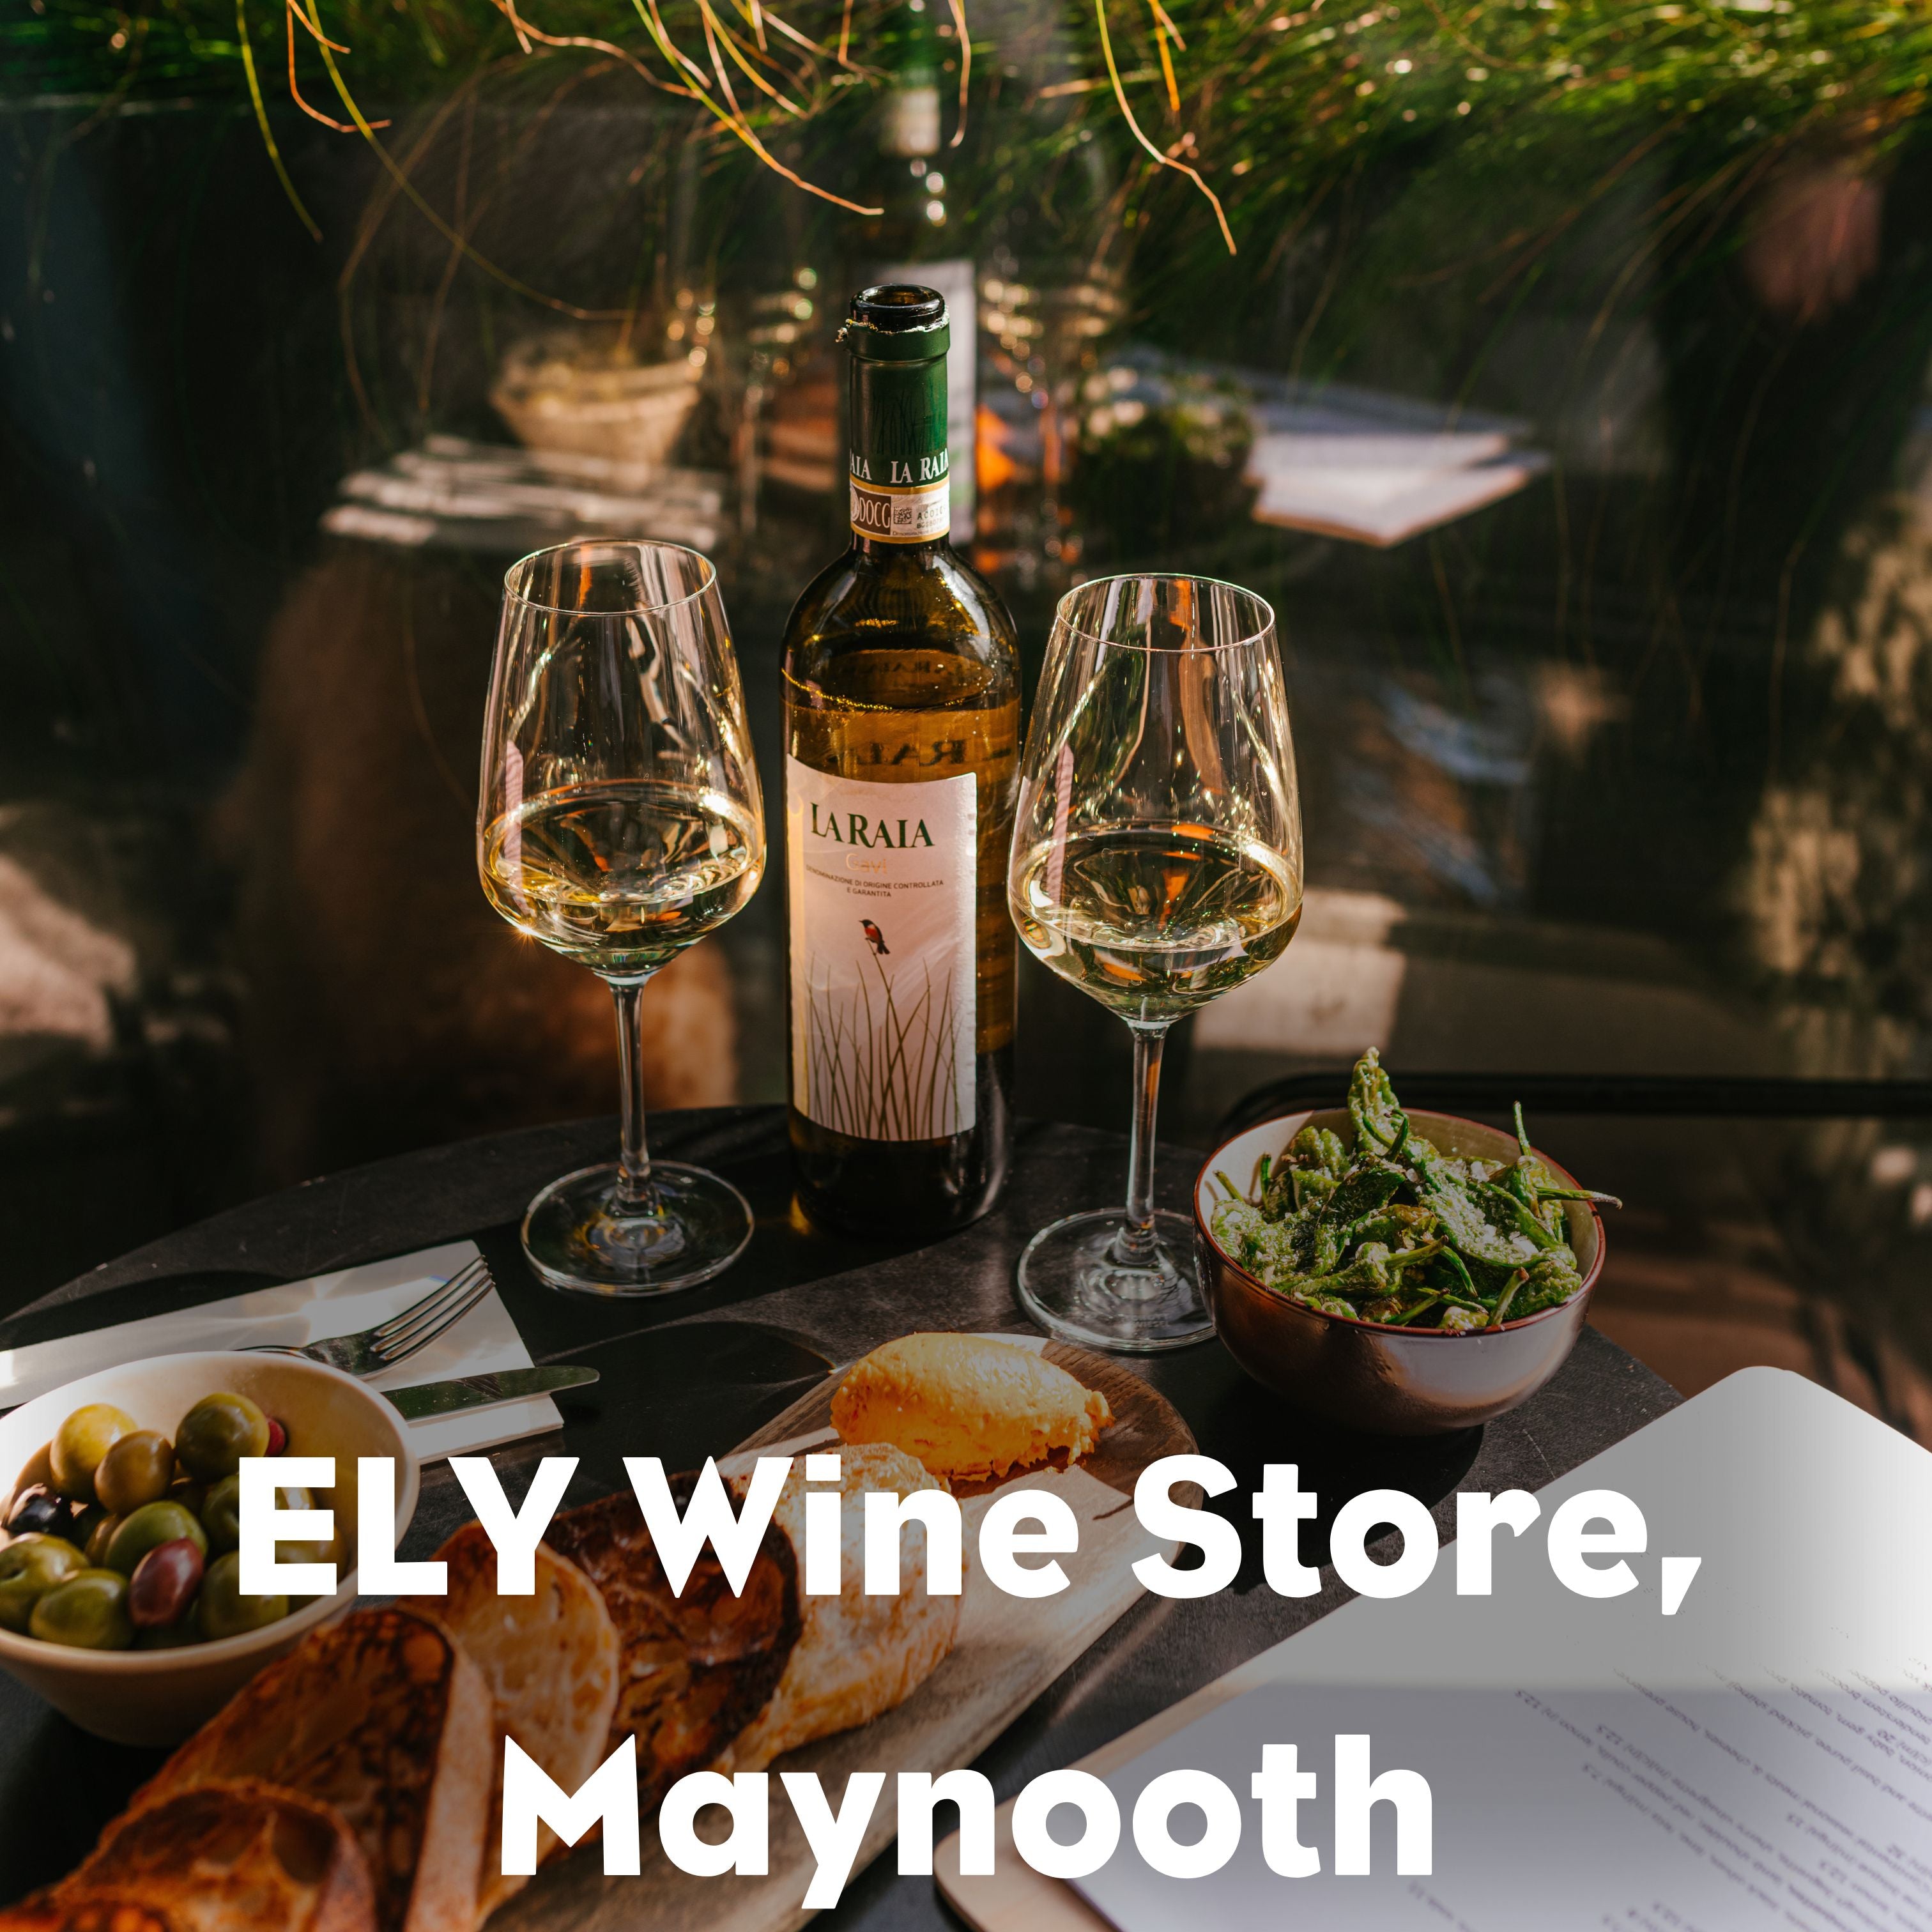 'Garden party!' – Reds, whites, rose & bubbles for summer entertaining - ELY Wine Store, Maynooth May 23rd